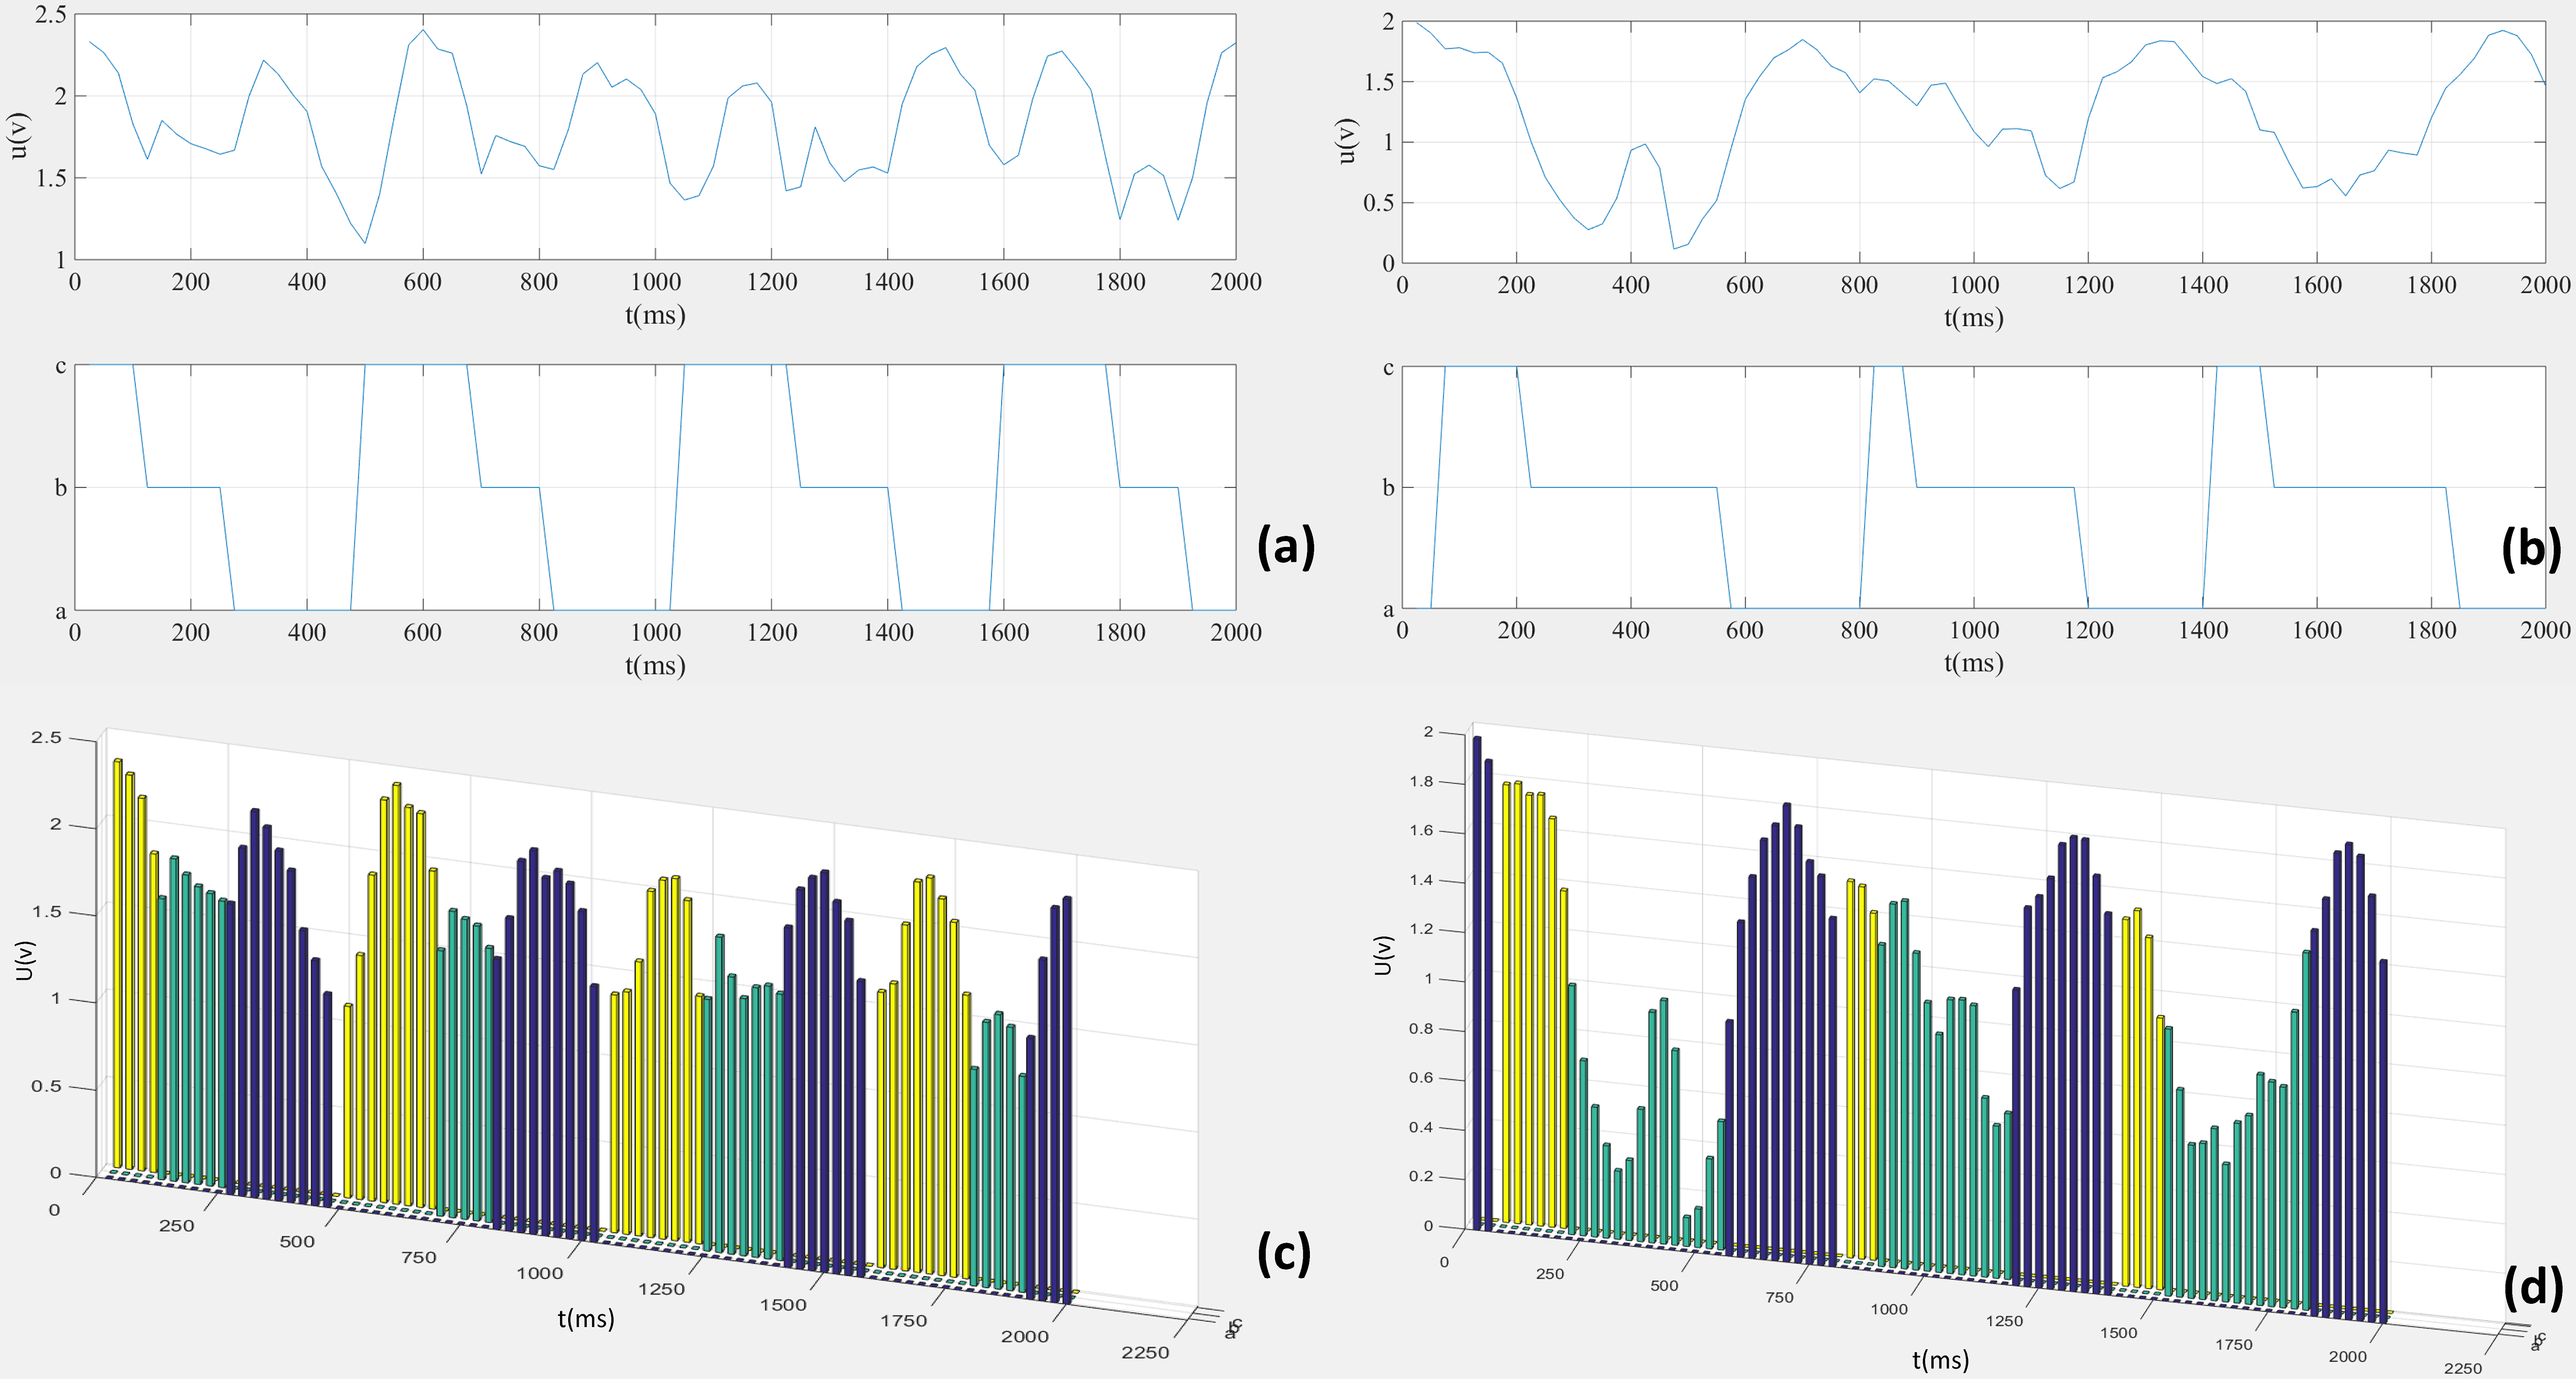 The training data of Zusanli. (a) Training data of Zusanli-left, (b) Training data of Zusanli-right, (c) Histogram of Zusanli-left, (d) Histogram of Zusanli-right. Note: a presents the sensing unit-a, b presents the sensing unit-b, c presents the sensing unit-c.